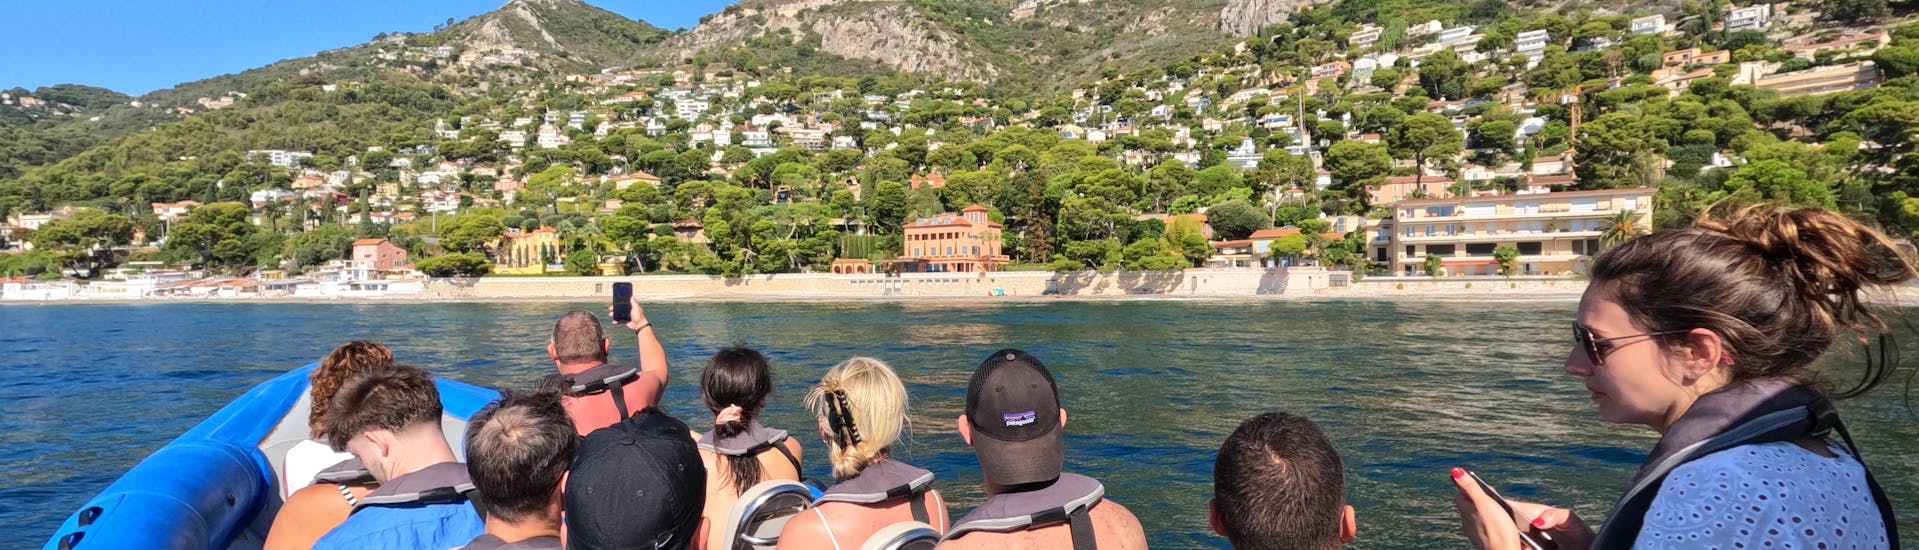 Group of people having fun during their Nissa Croisières' RIB Boat Trip to Saint-Jean-Cap-Ferrat and Monaco from Nice with Snorkeling.